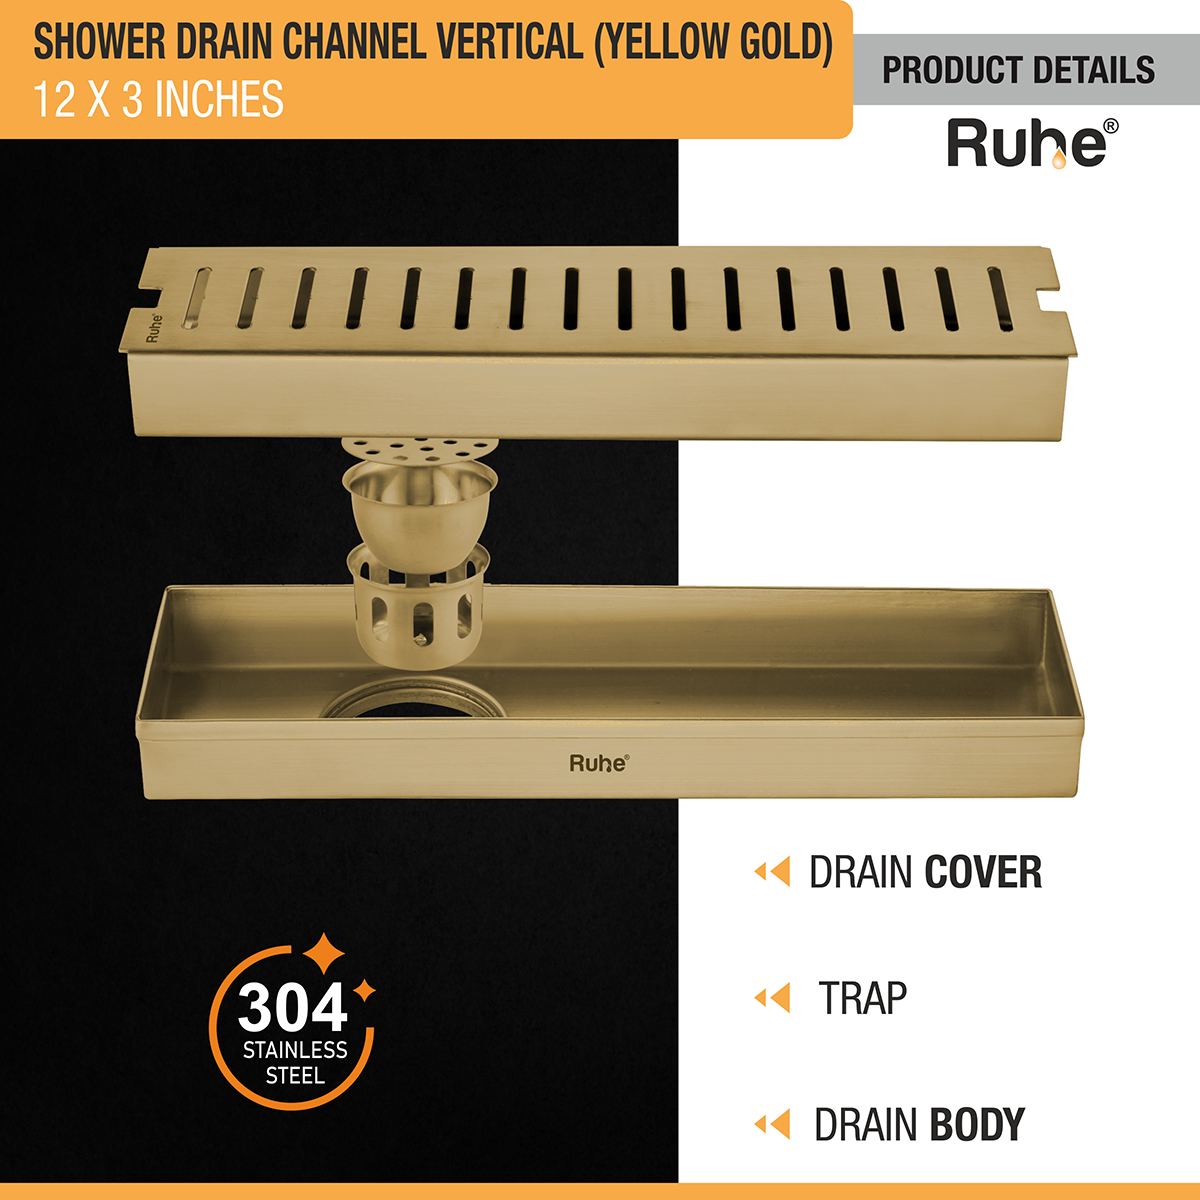 Vertical Shower Drain Channel (12 x 3 Inches) YELLOW GOLD product details